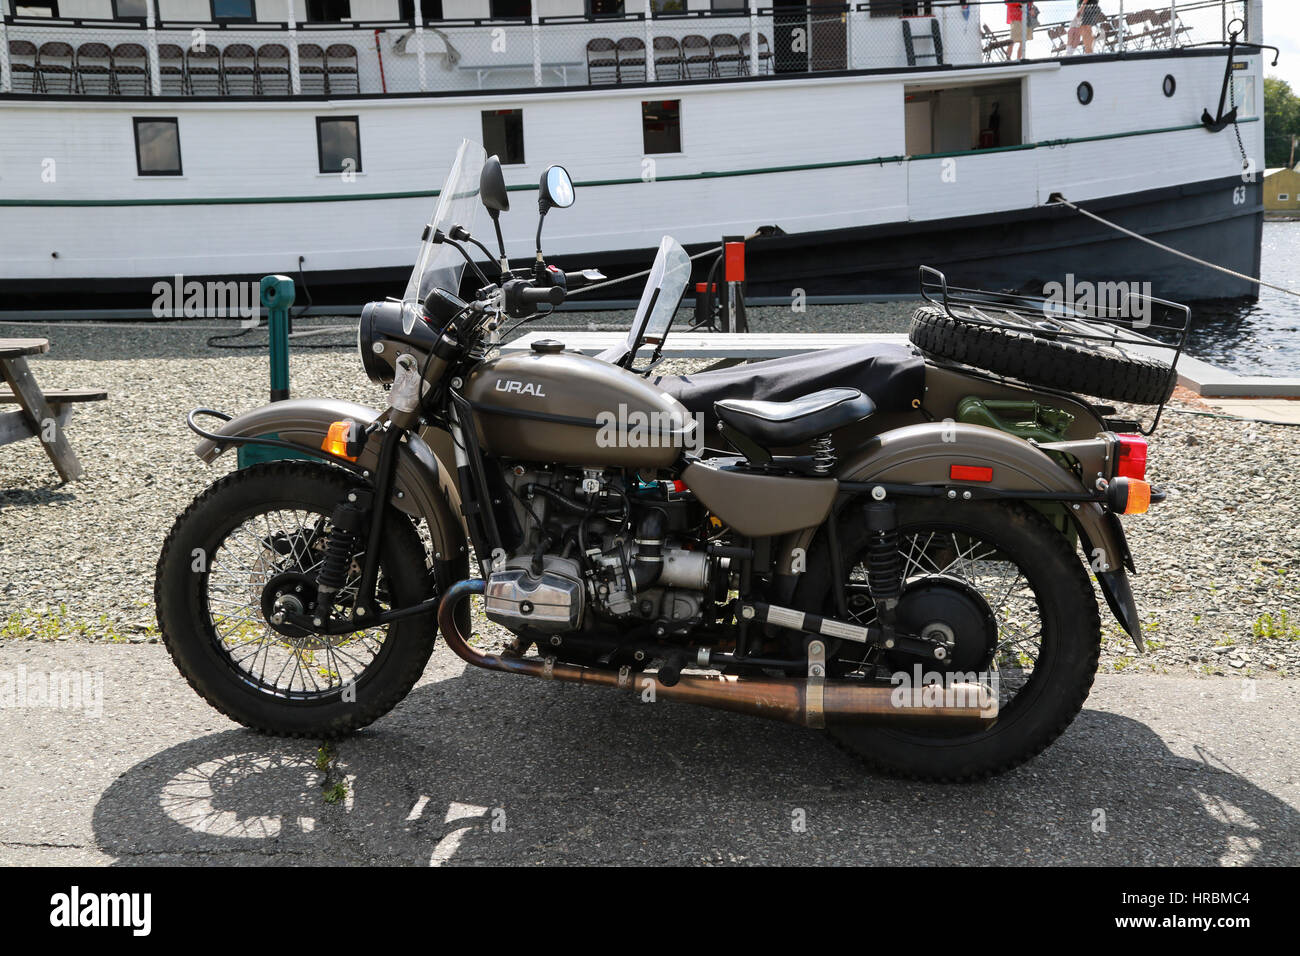 Russian-made motorcycle and in background The Century-old Motor Vessel Katahdin on Moosehead Lake docked in Greenville, Maine Stock Photo